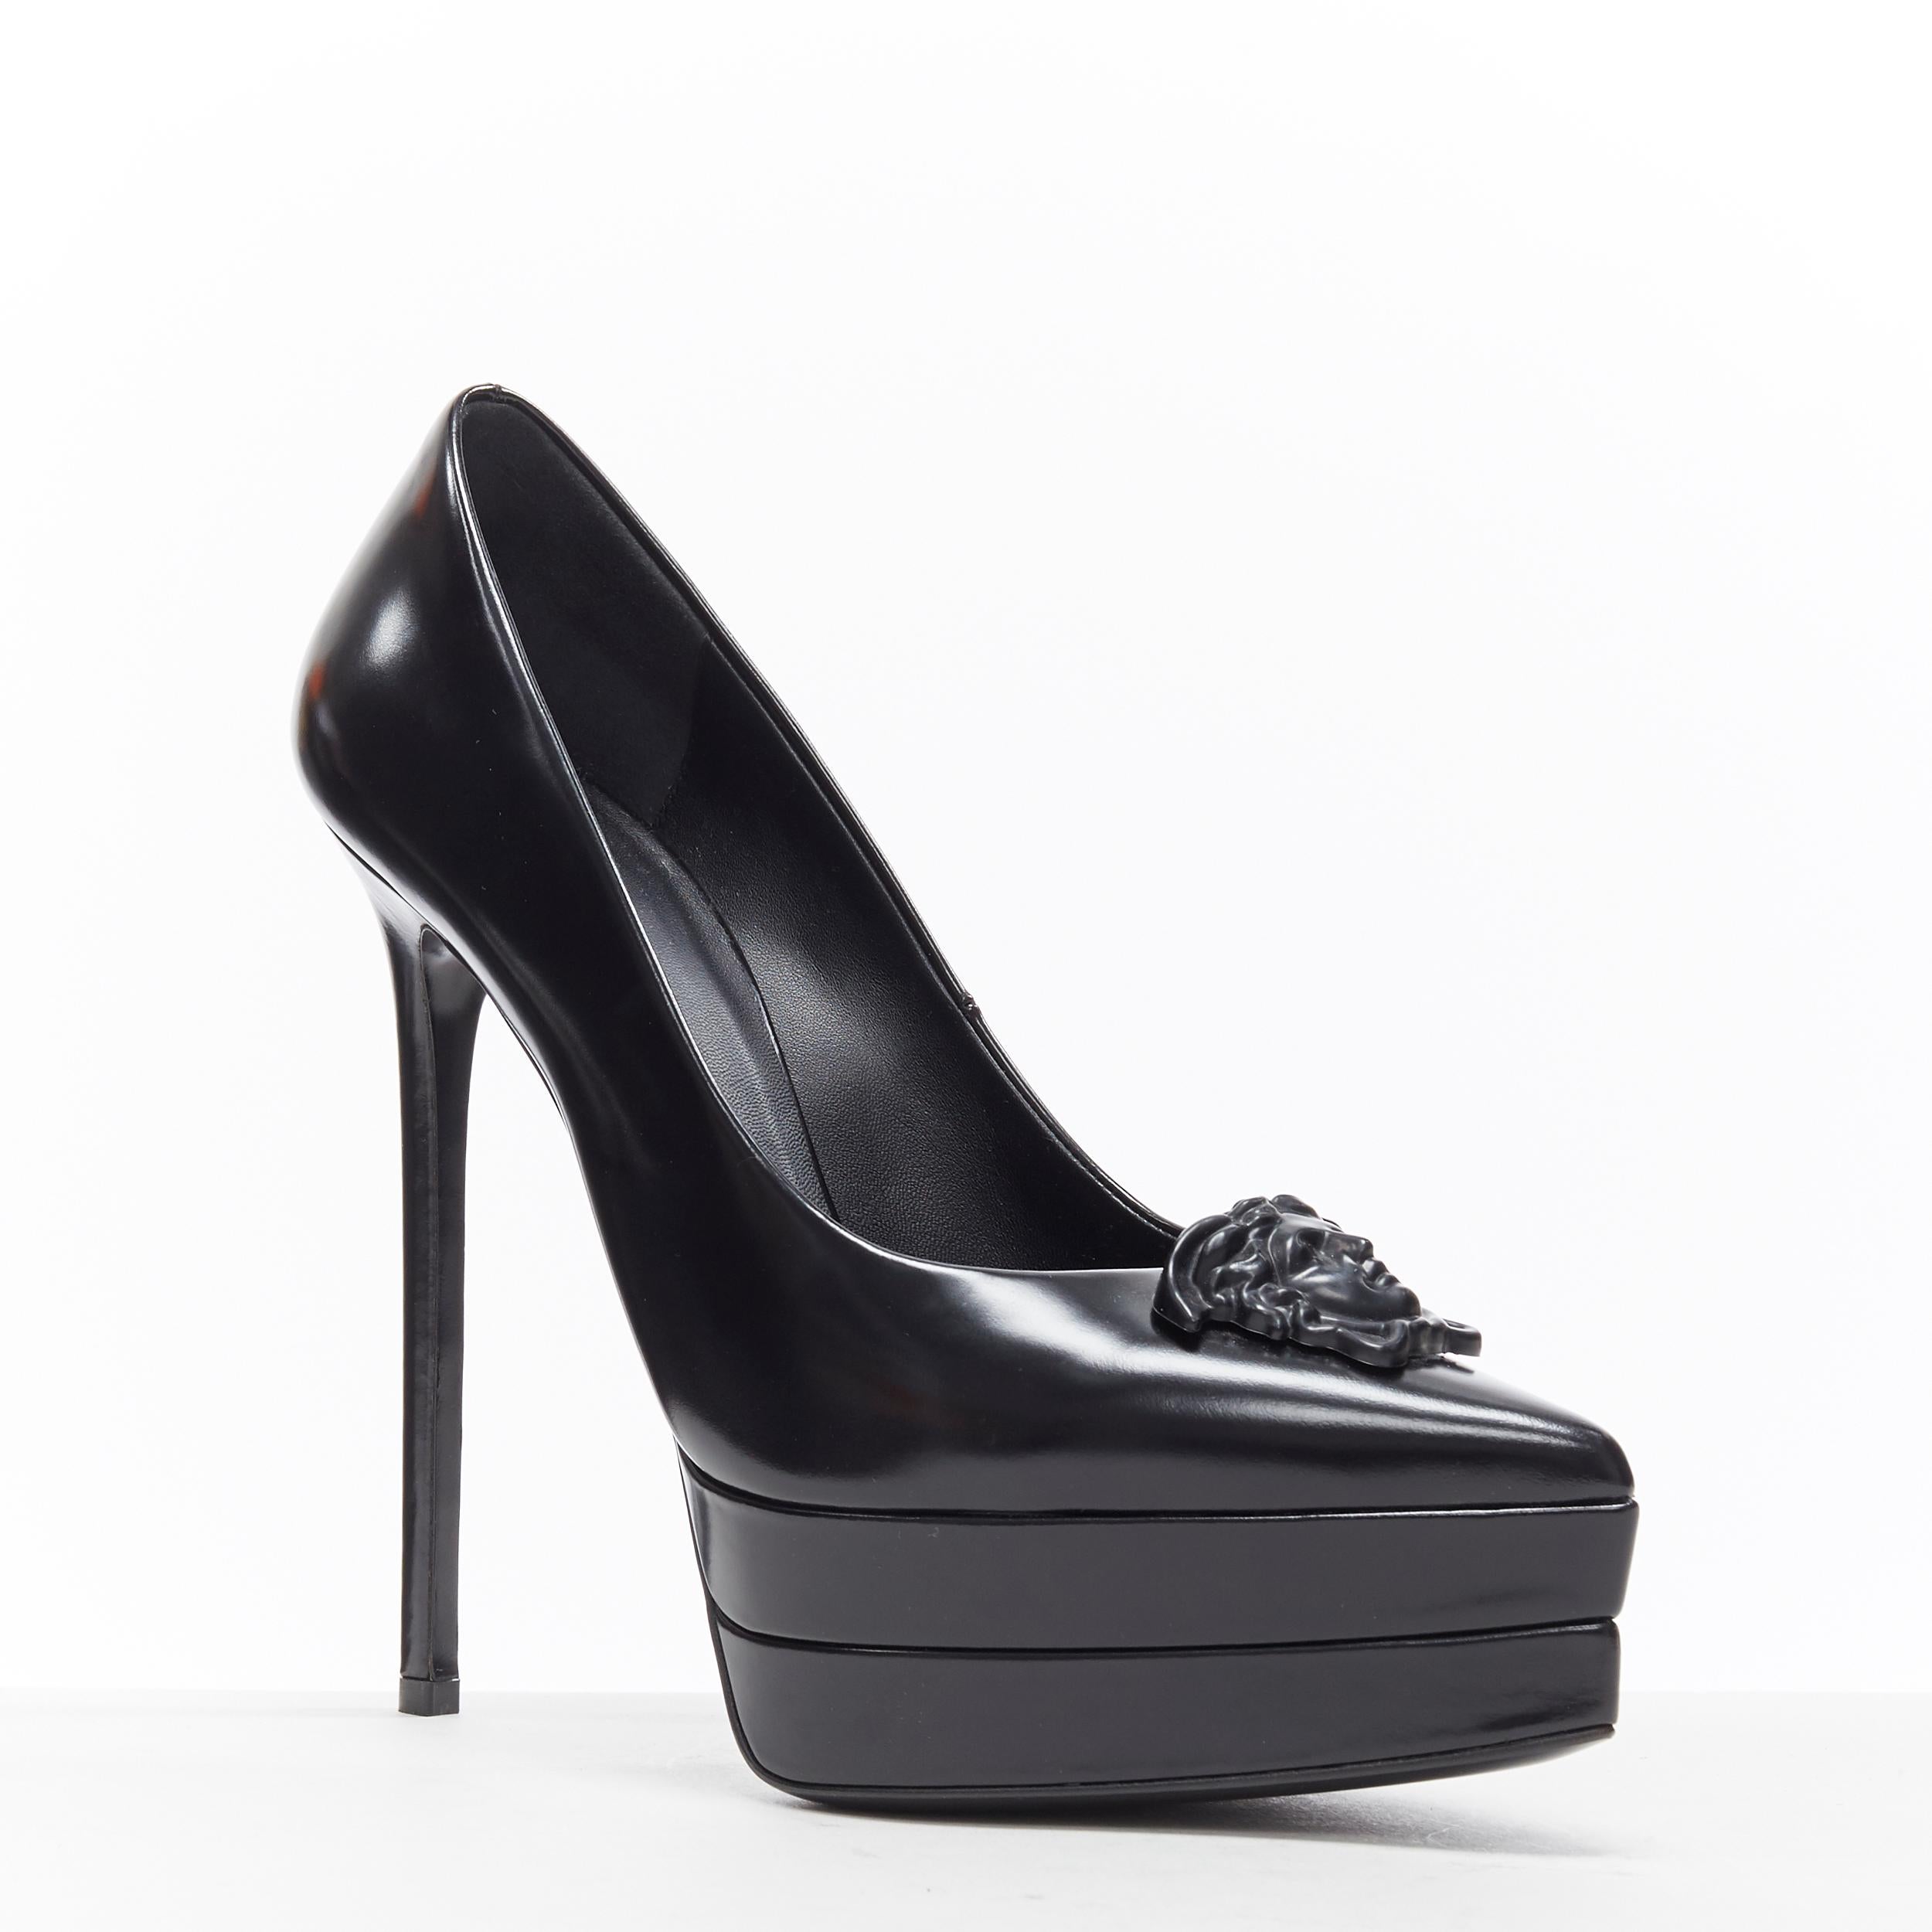 new VERSACE Palazzo Medusa black tonal triple platform point pump EU39
Brand: Versace
Designer: Donatella Versace
Model Name / Style: Palazzo Medusa platform
Material: Leather
Color: Grey; beige and black
Pattern: Solid
Lining material: